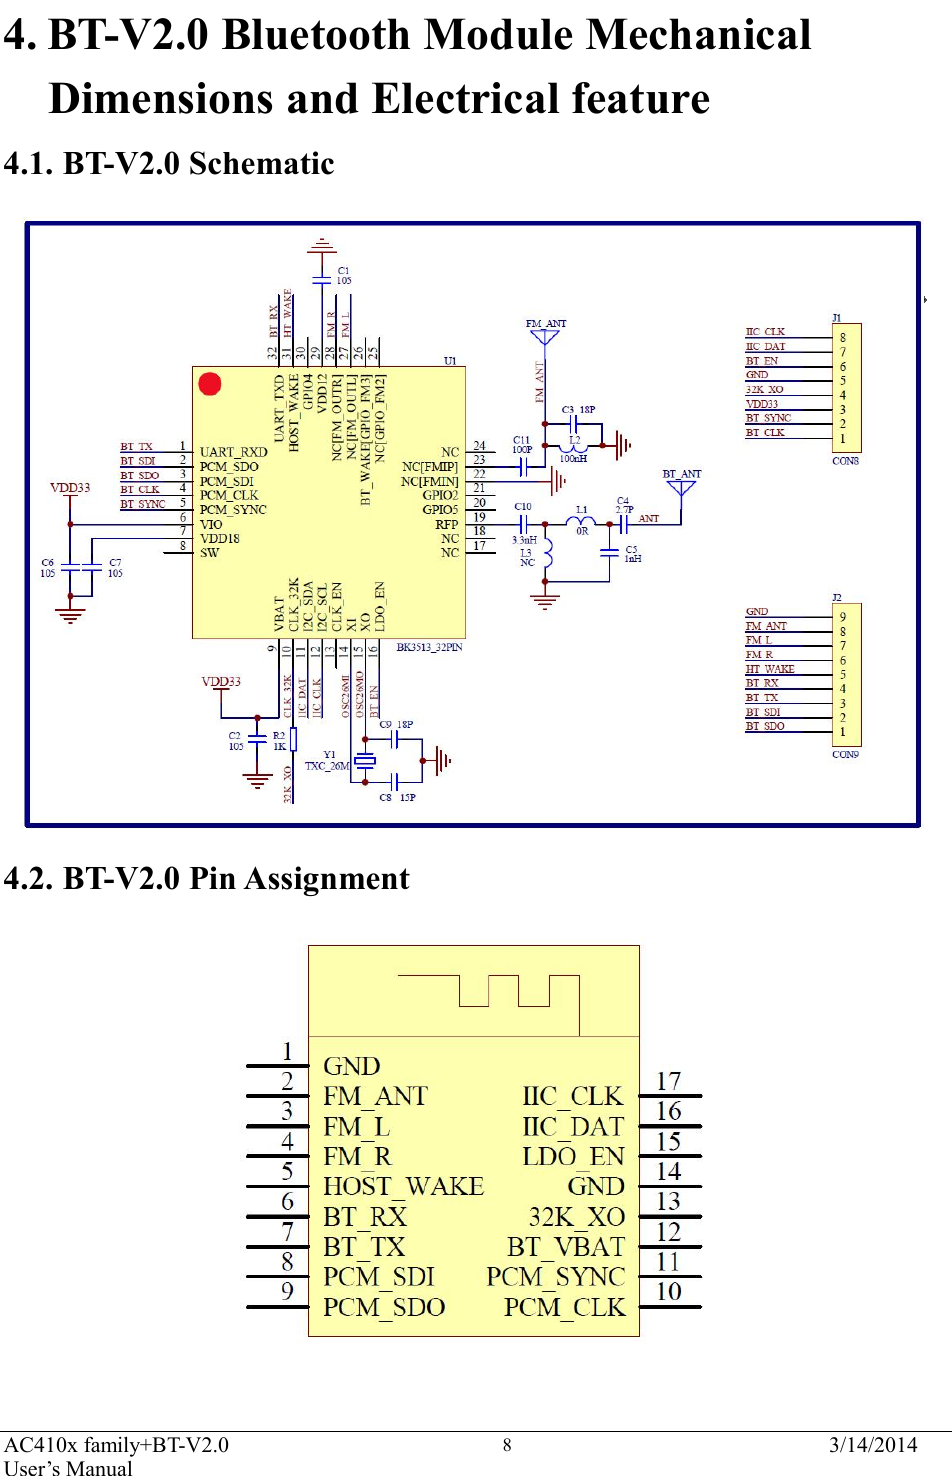 AC410x family+BT-V2.0 User’s Manual 3/14/2014 8                      4. BT-V2.0 Bluetooth Module Mechanical  Dimensions and Electrical feature  4.1. BT-V2.0 Schematic                                 4.2. BT-V2.0 Pin Assignment 